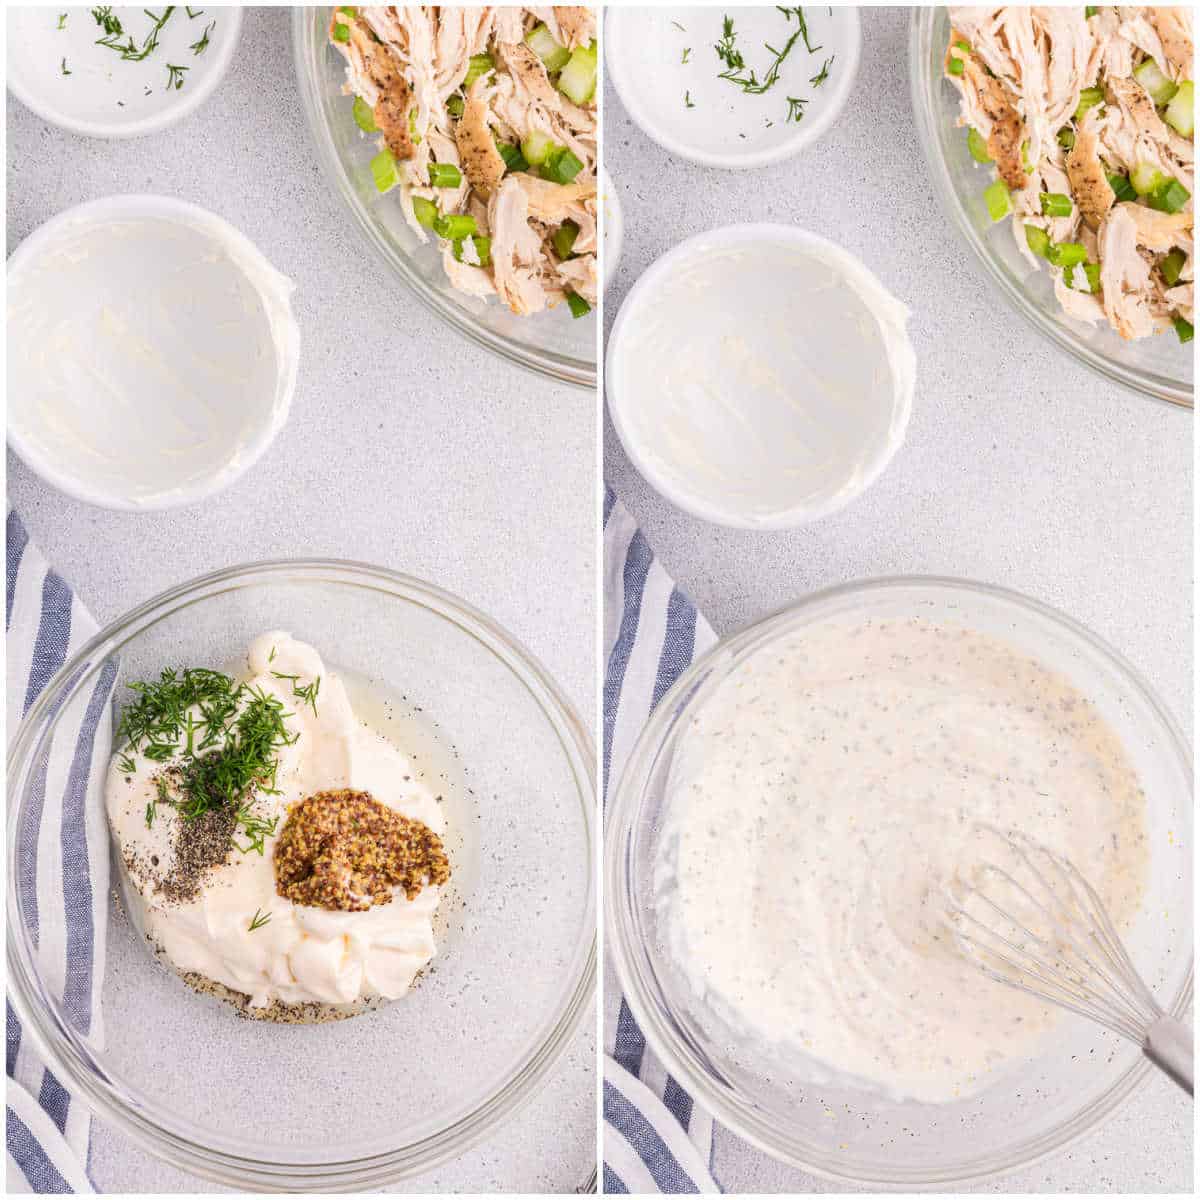 Steps to make classic chicken salad.